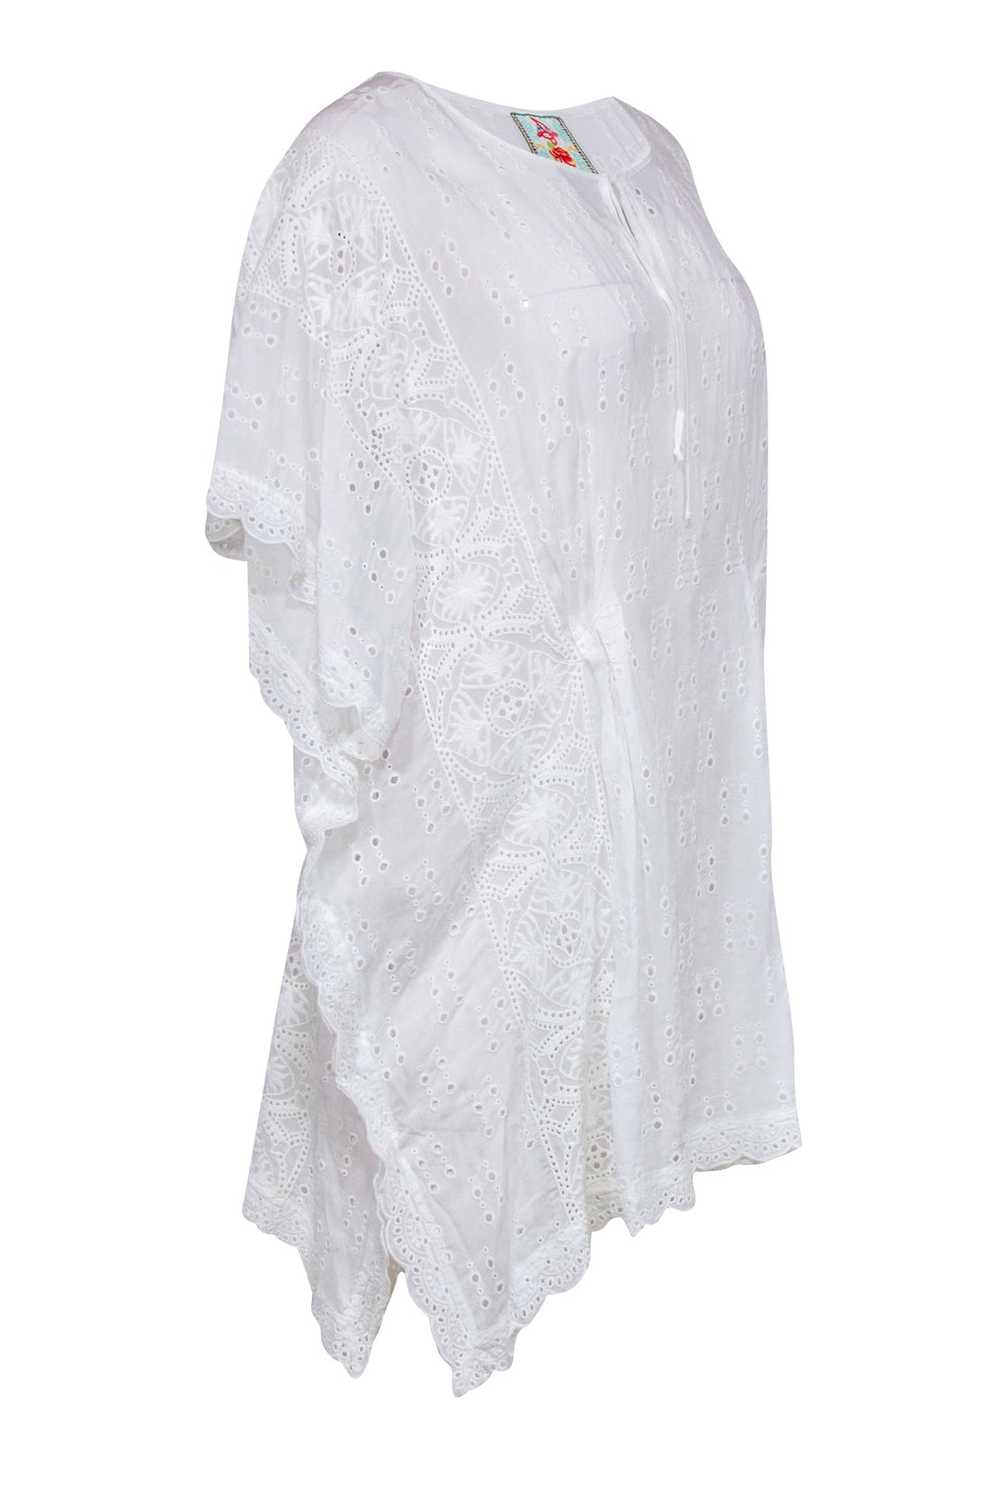 Johnny Was - White Eyelet Caftan-Style Top w/ Sca… - image 2